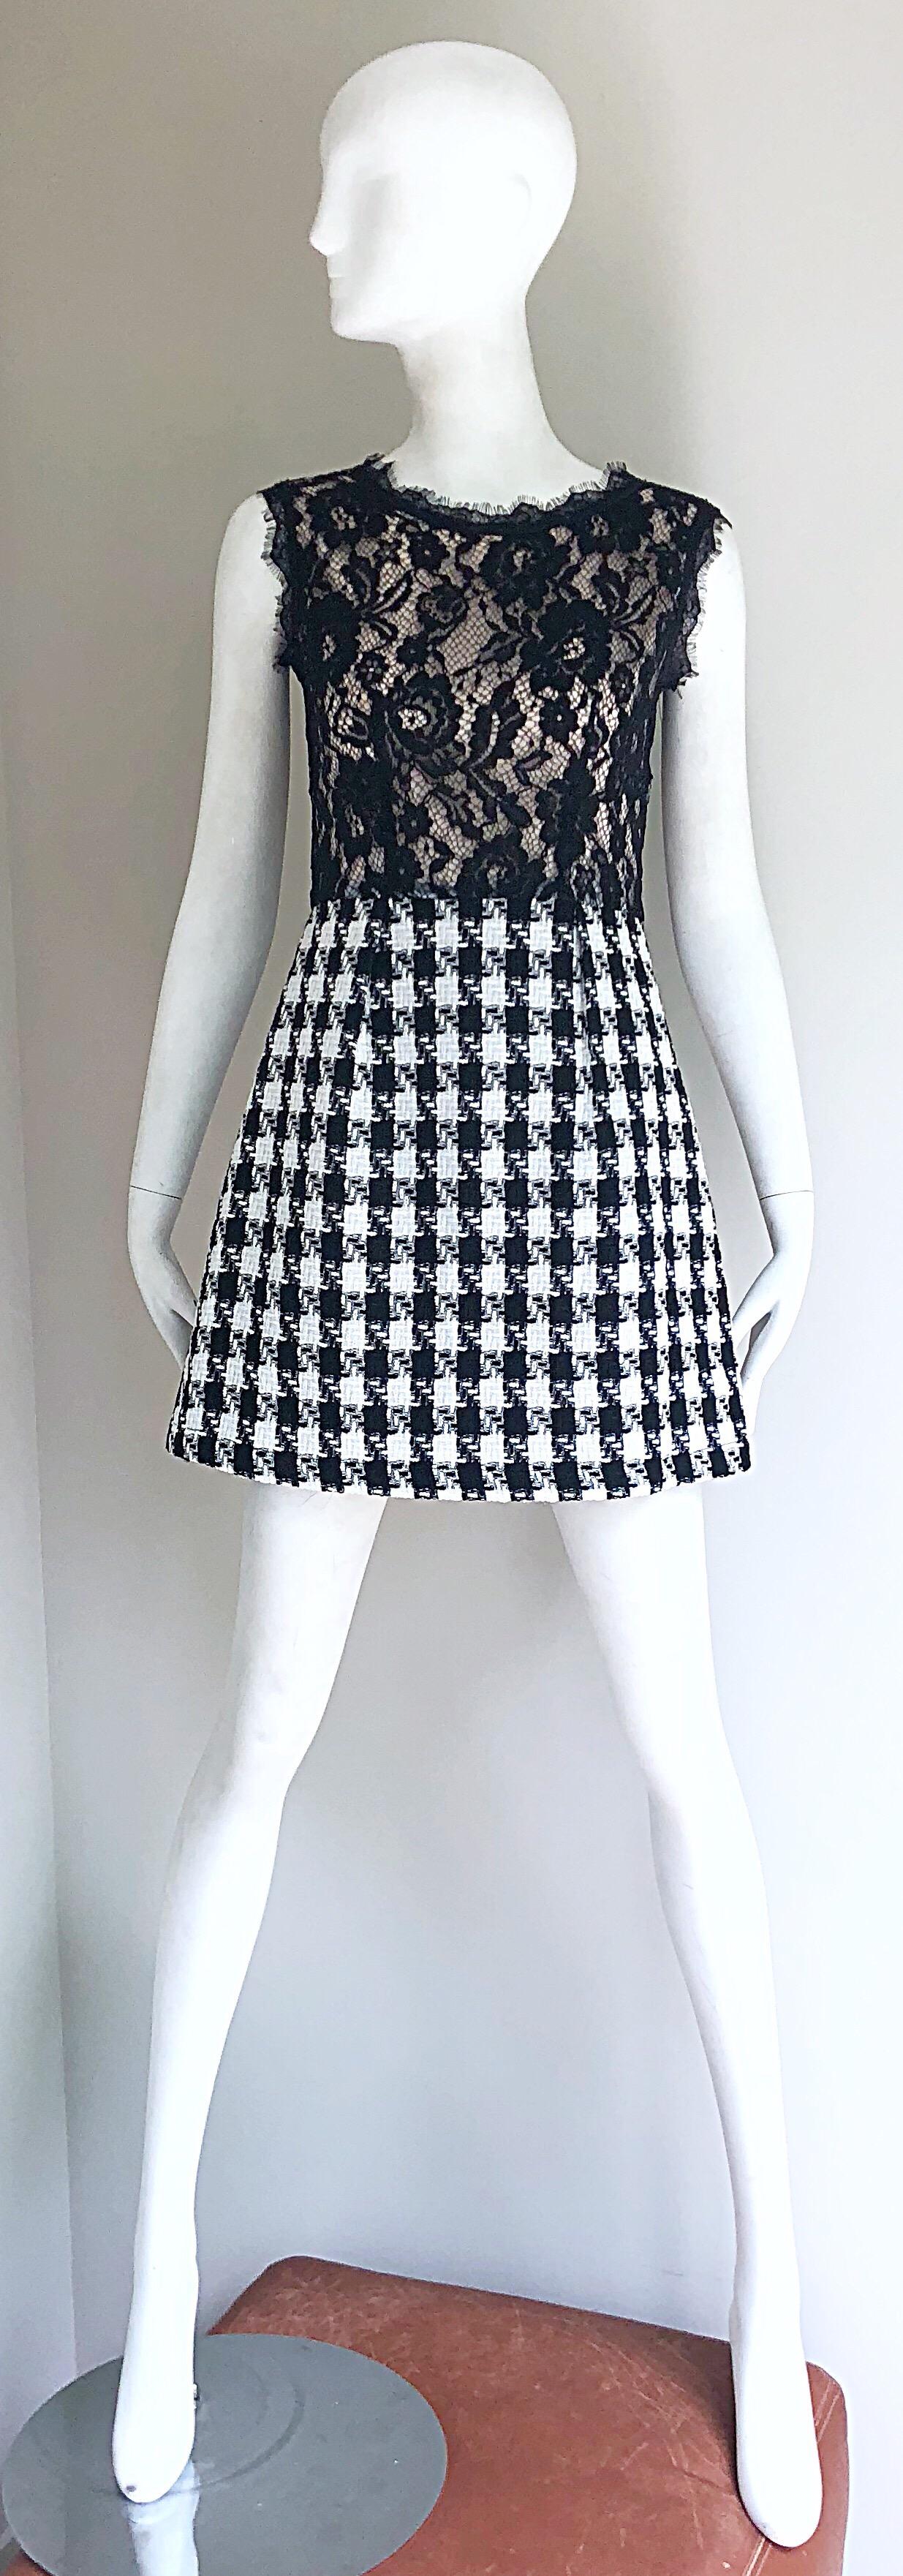 Marc Jacobs Early 2000s Black and White Lace Houndstooth Checkered Mini Dress For Sale 8